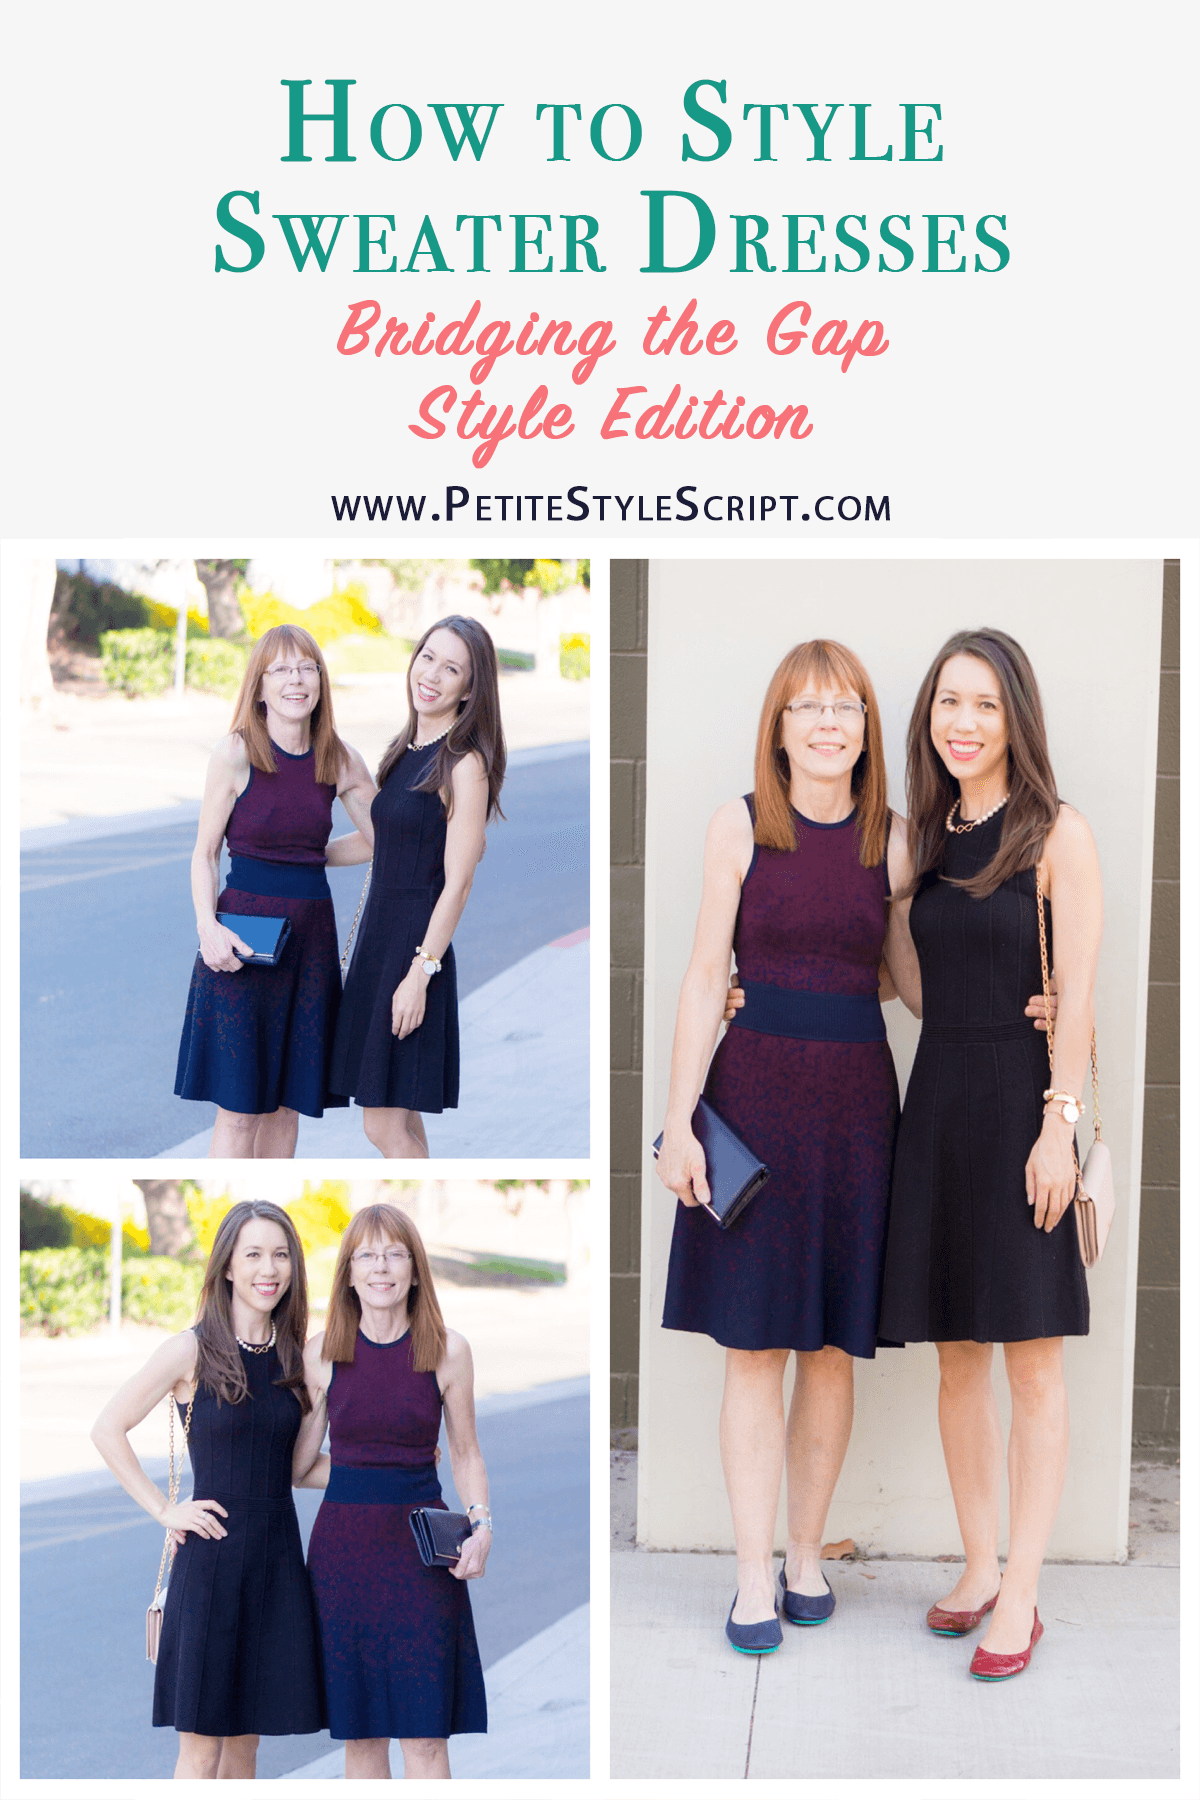 How to Style Sweater Dresses | Bridging the Gap Style Edition | Mother-daughter style advice | Petite fashion and style blog | Ann Taylor | LOFT | Nordstrom | Macy's | Tieks ballet flats | Tory Burch wallets | KJP pearl bracelet | Pieces of Me Bracelet Cuff